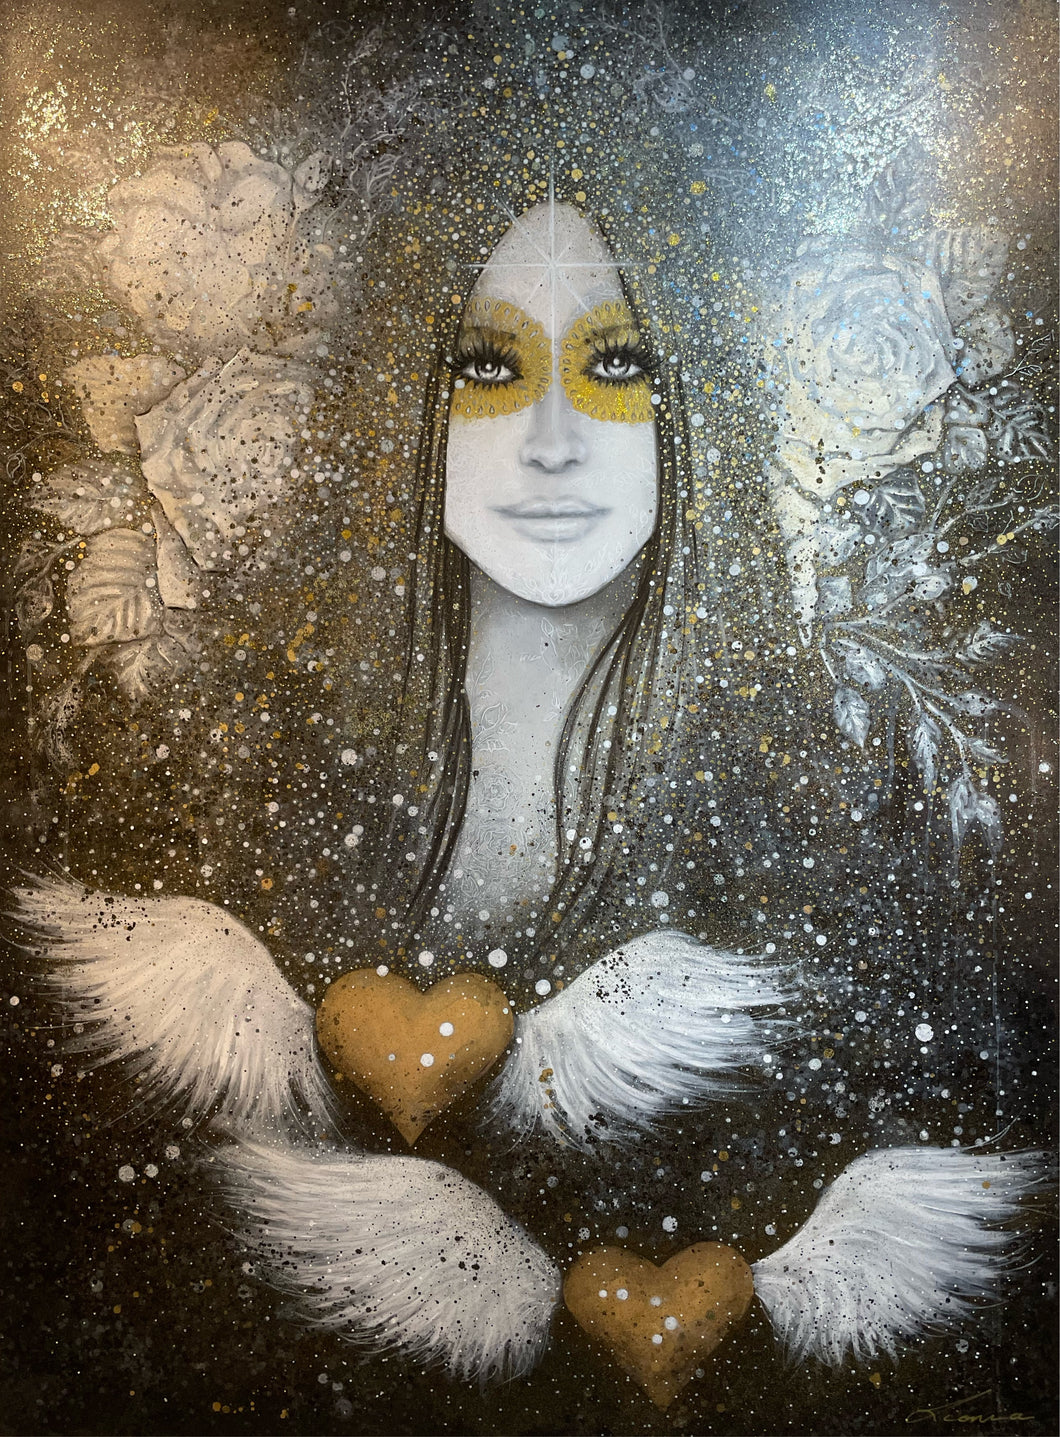 Elysian - Portrait of girl with the look of serene calm, golden winged hearts, white roses and detailed lace mask. Painted on a large scale 1.9x1.4m stretched canvas with white and gold tones.